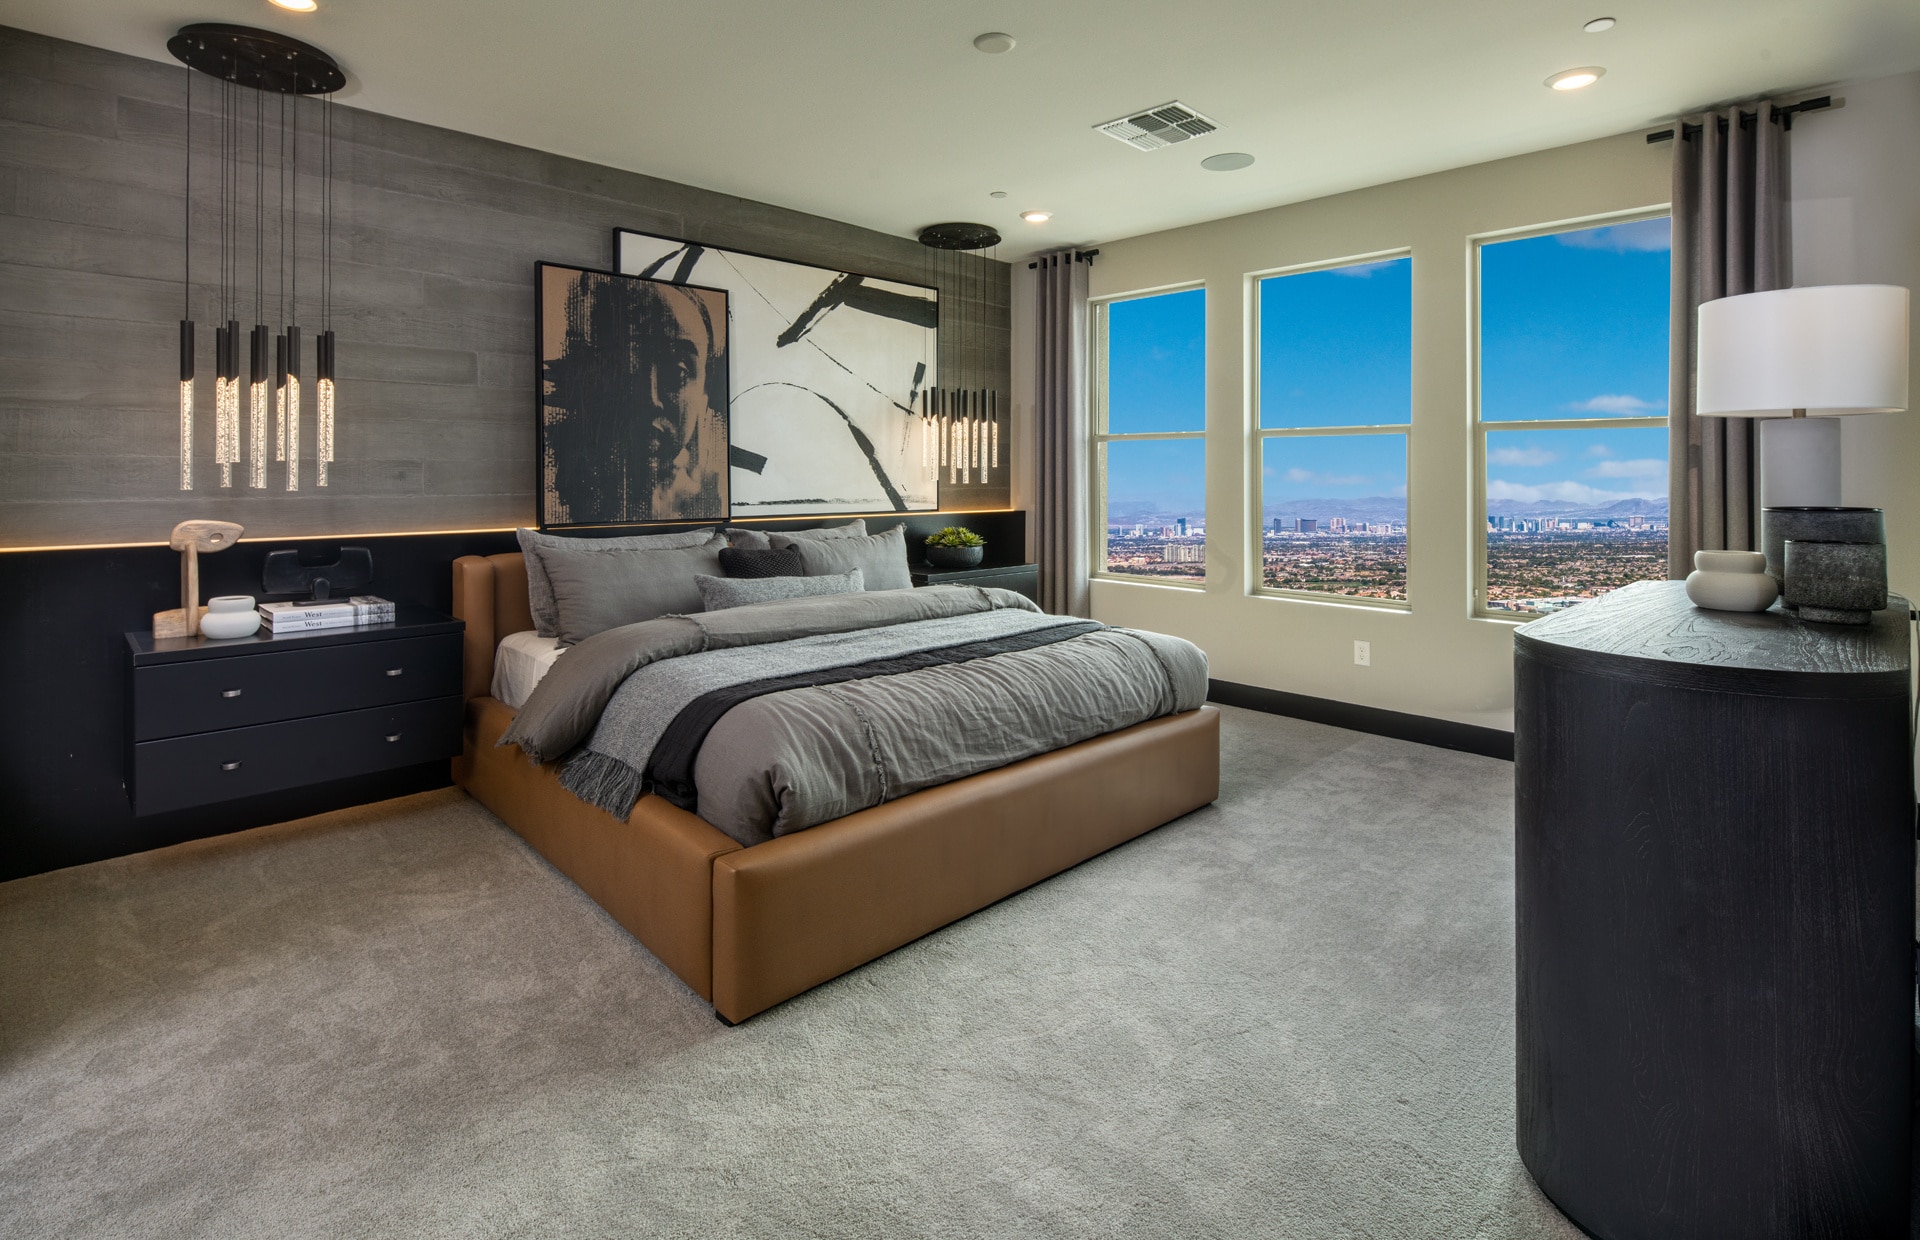 Primary Bedroom of Vittoria Model at Carmel Cliff by Pulte Homes